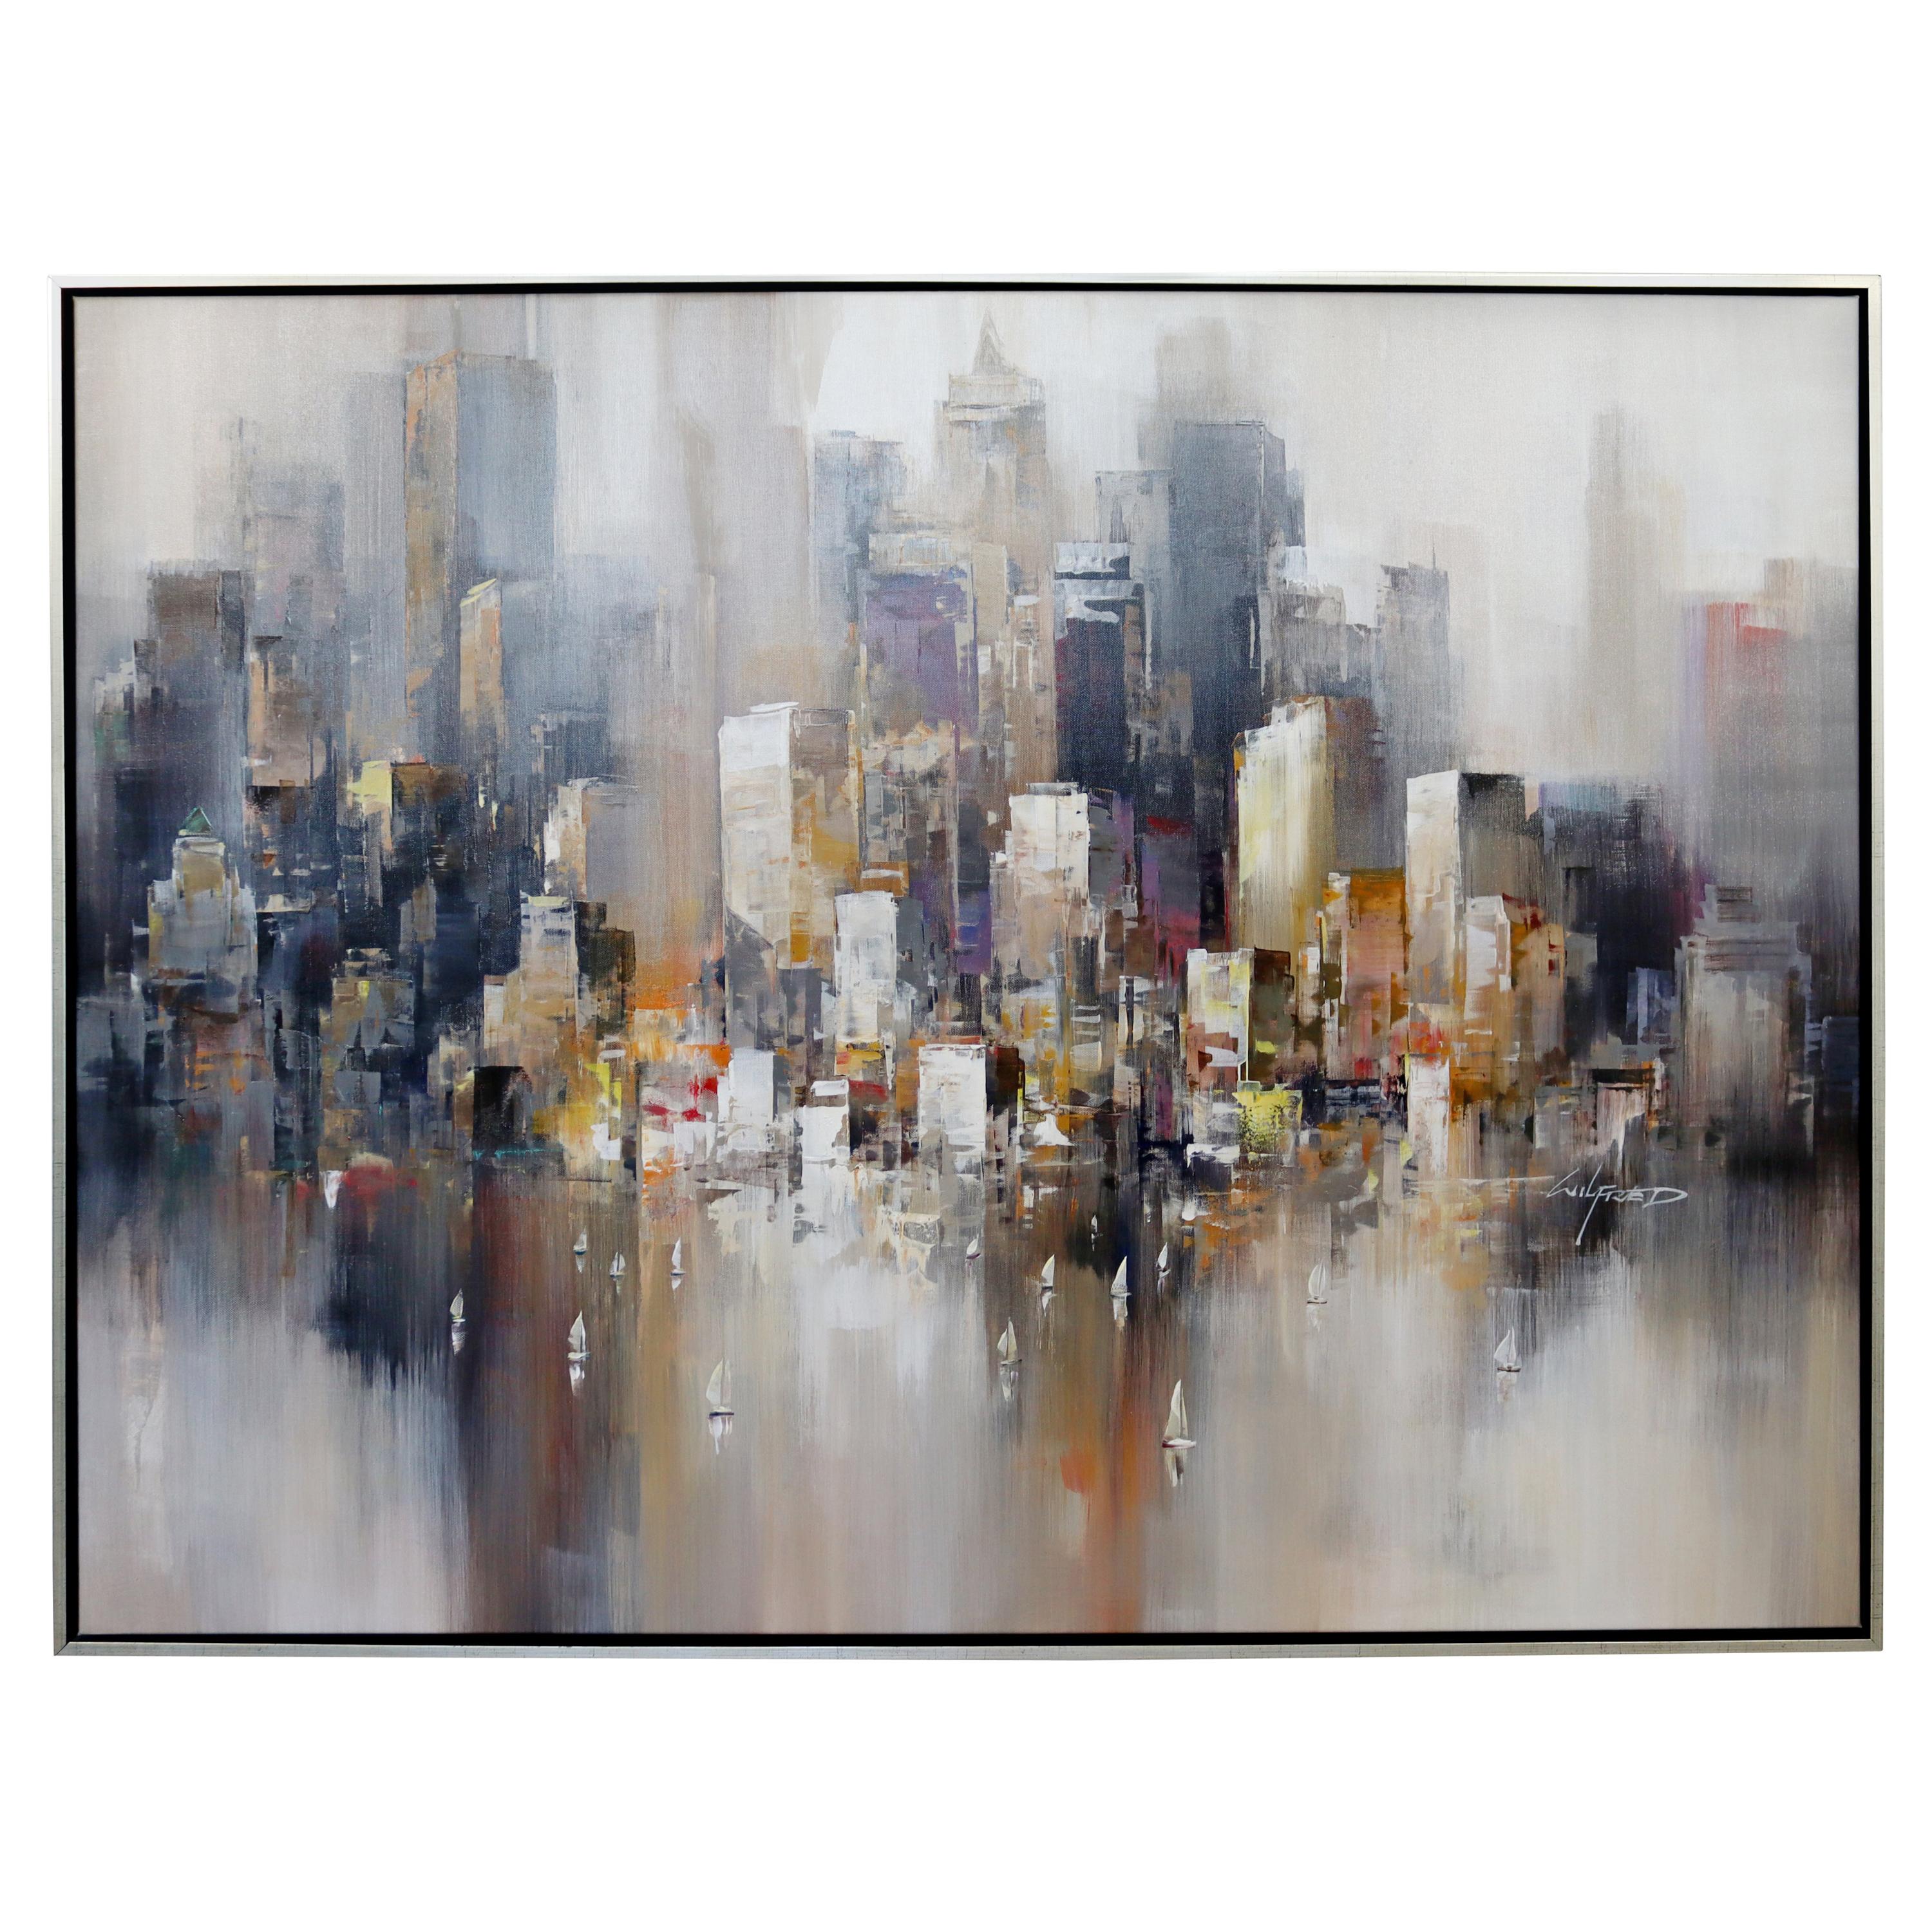 Mid-Century Modern Framed Acrylic Painting Canvas Signed Wilfred 1970s Cityscape